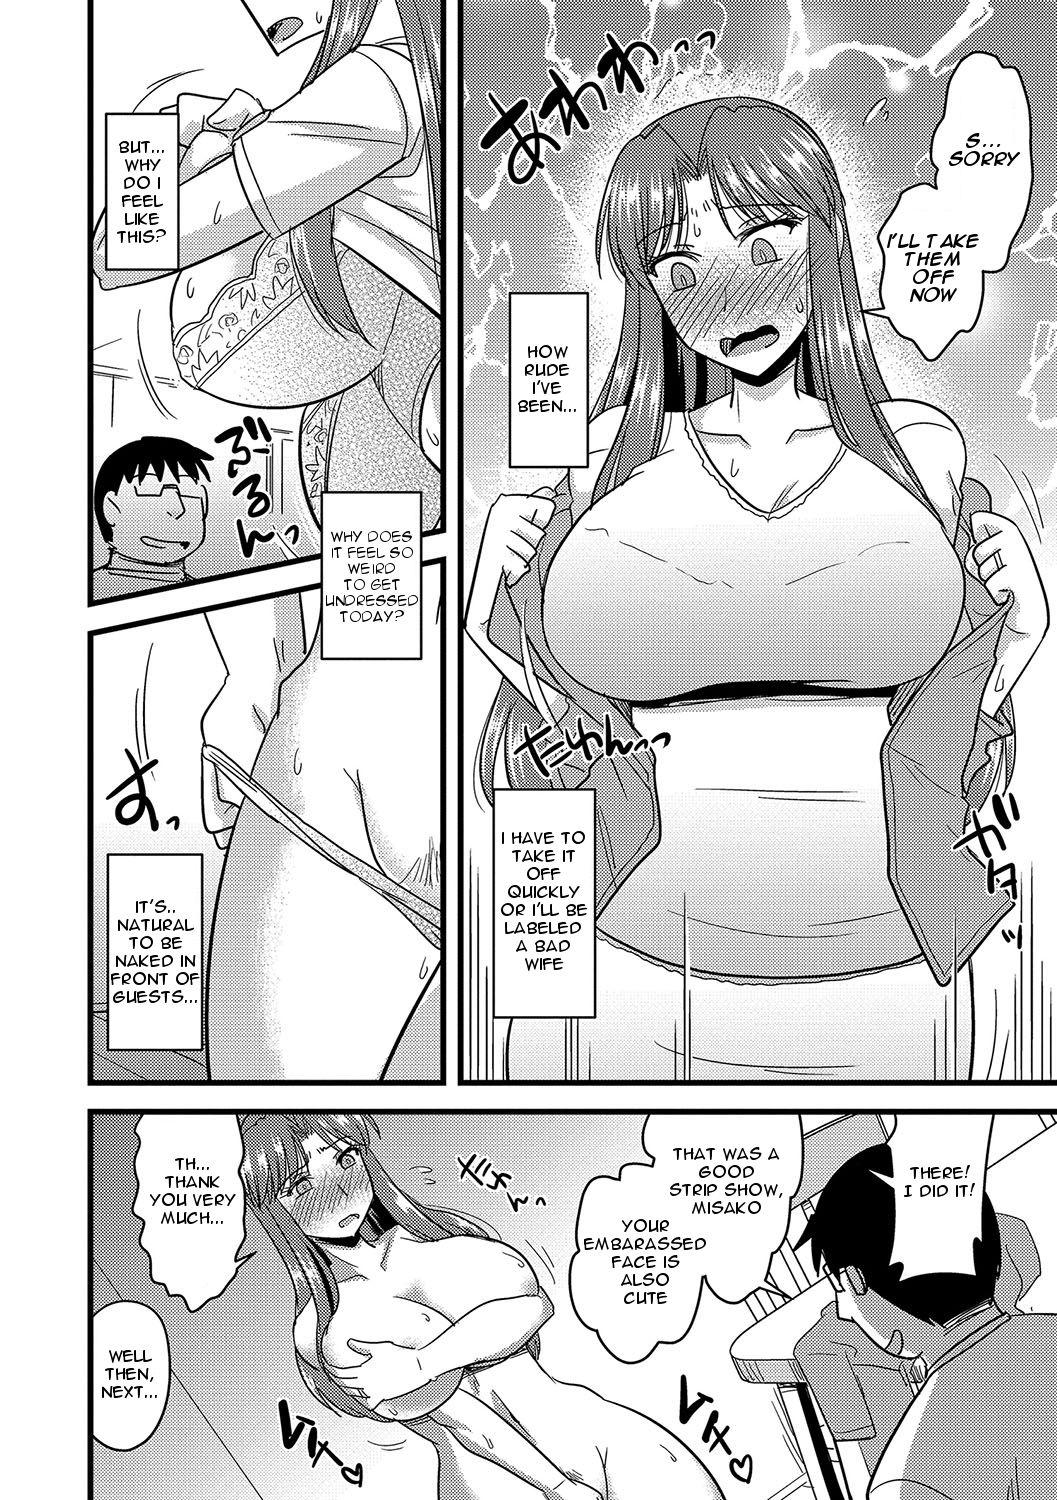 Super Tanin no Tsuma no Netorikata | How to Steal Another Man's Wife Ch. 1-3 Tgirl - Page 9